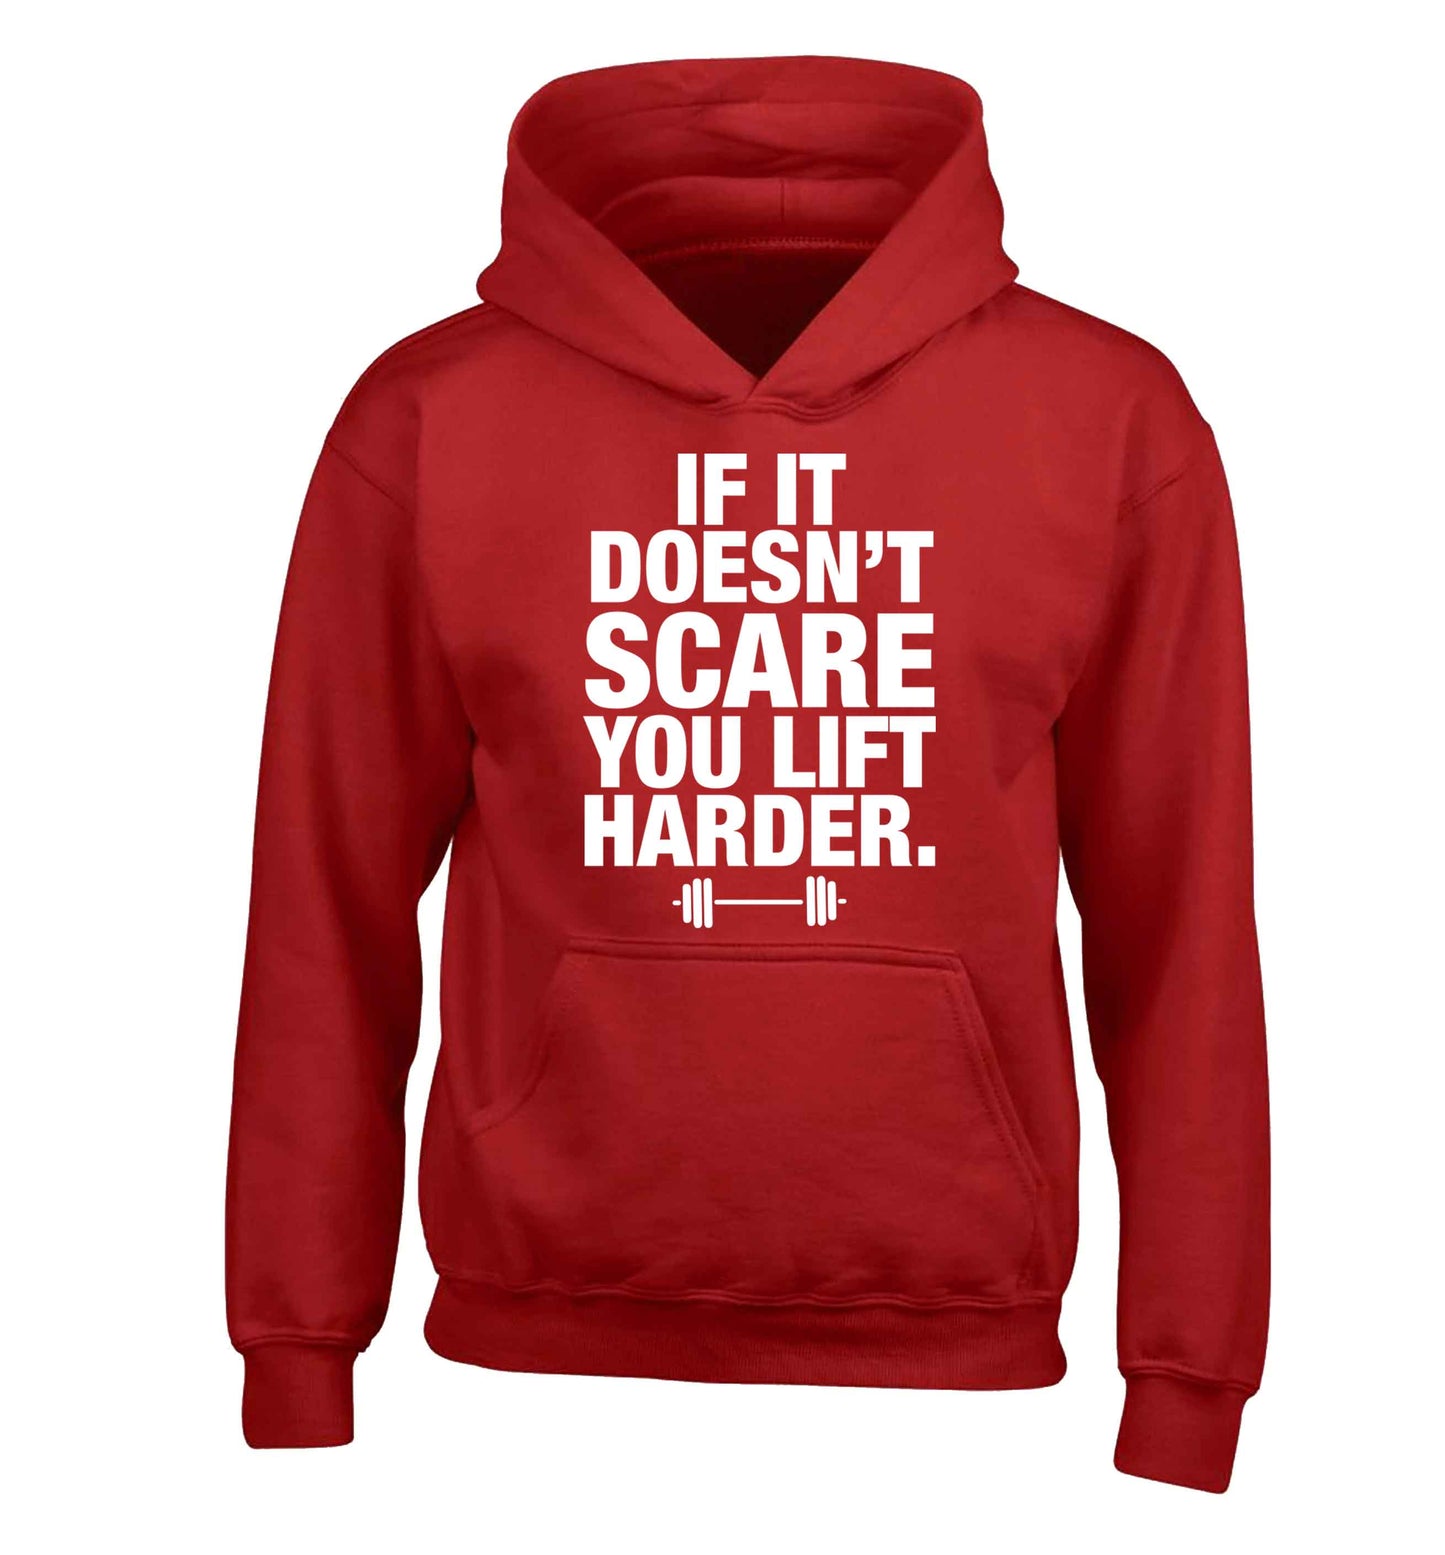 If it doesnt' scare you lift harder children's red hoodie 12-13 Years